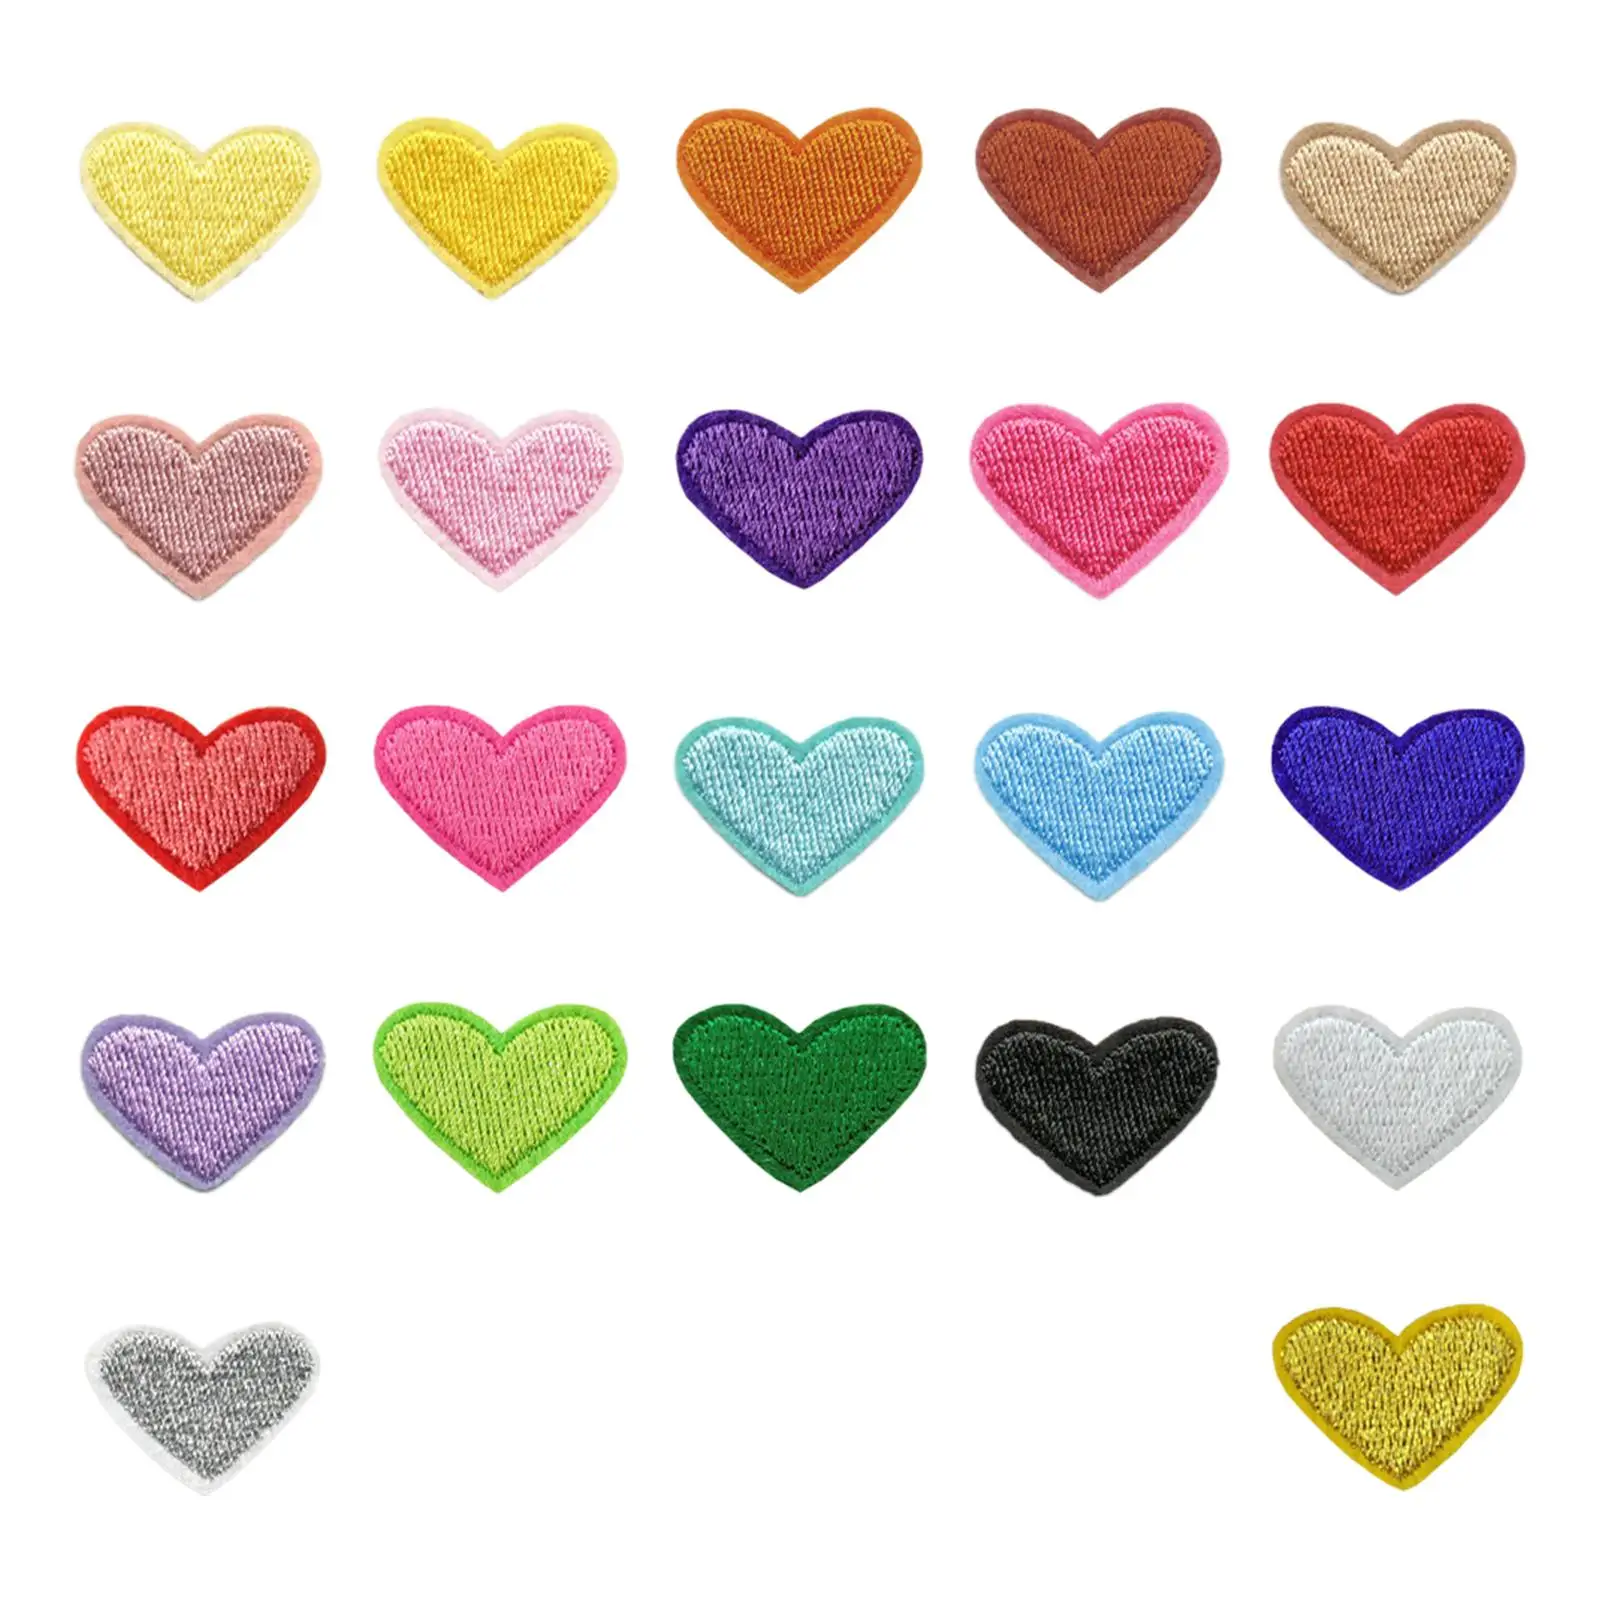 22Pcs Heart Iron on Patches Embroidery Applique Fabric Patches Repair Patch Decals for Bag Families Clothes Arts Crafts Hat